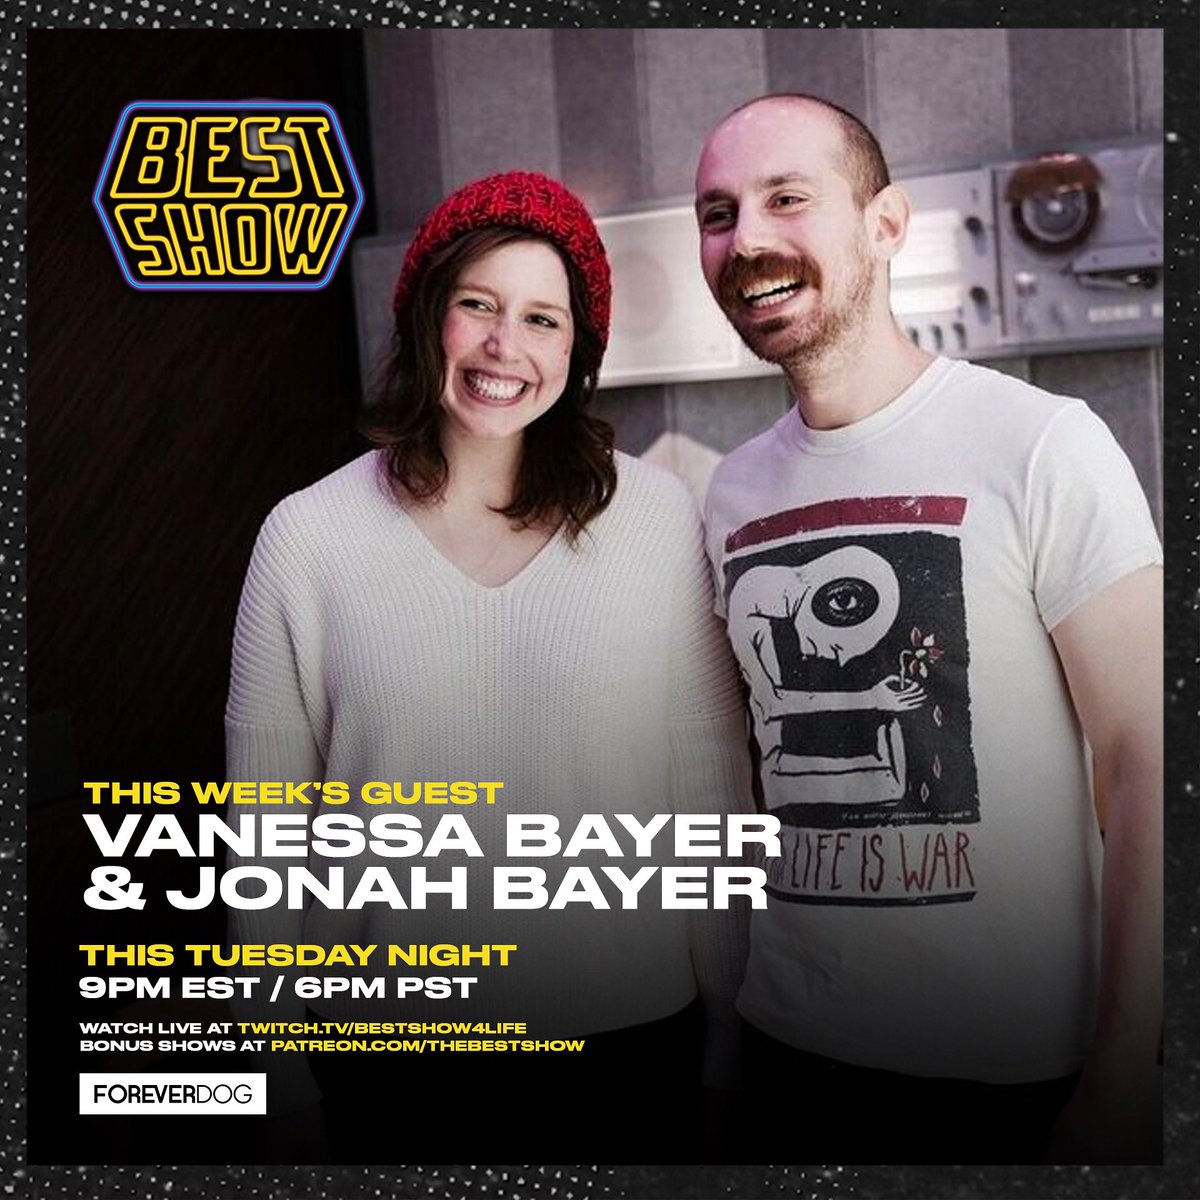 THIS TUESDAY NIGHT! @vanessabayer and @jonahmbayer join @scharpling LIVE on The Best Show!

*Live on Twitch Tues 9pm ET
➡️Twitch.tv/bestshow4life

*Podcast on Wednesday
➡️ linktr.ee/bestshow4life

*Video/Bonus Shows on Patreon
➡️Patreon.com/thebestshow